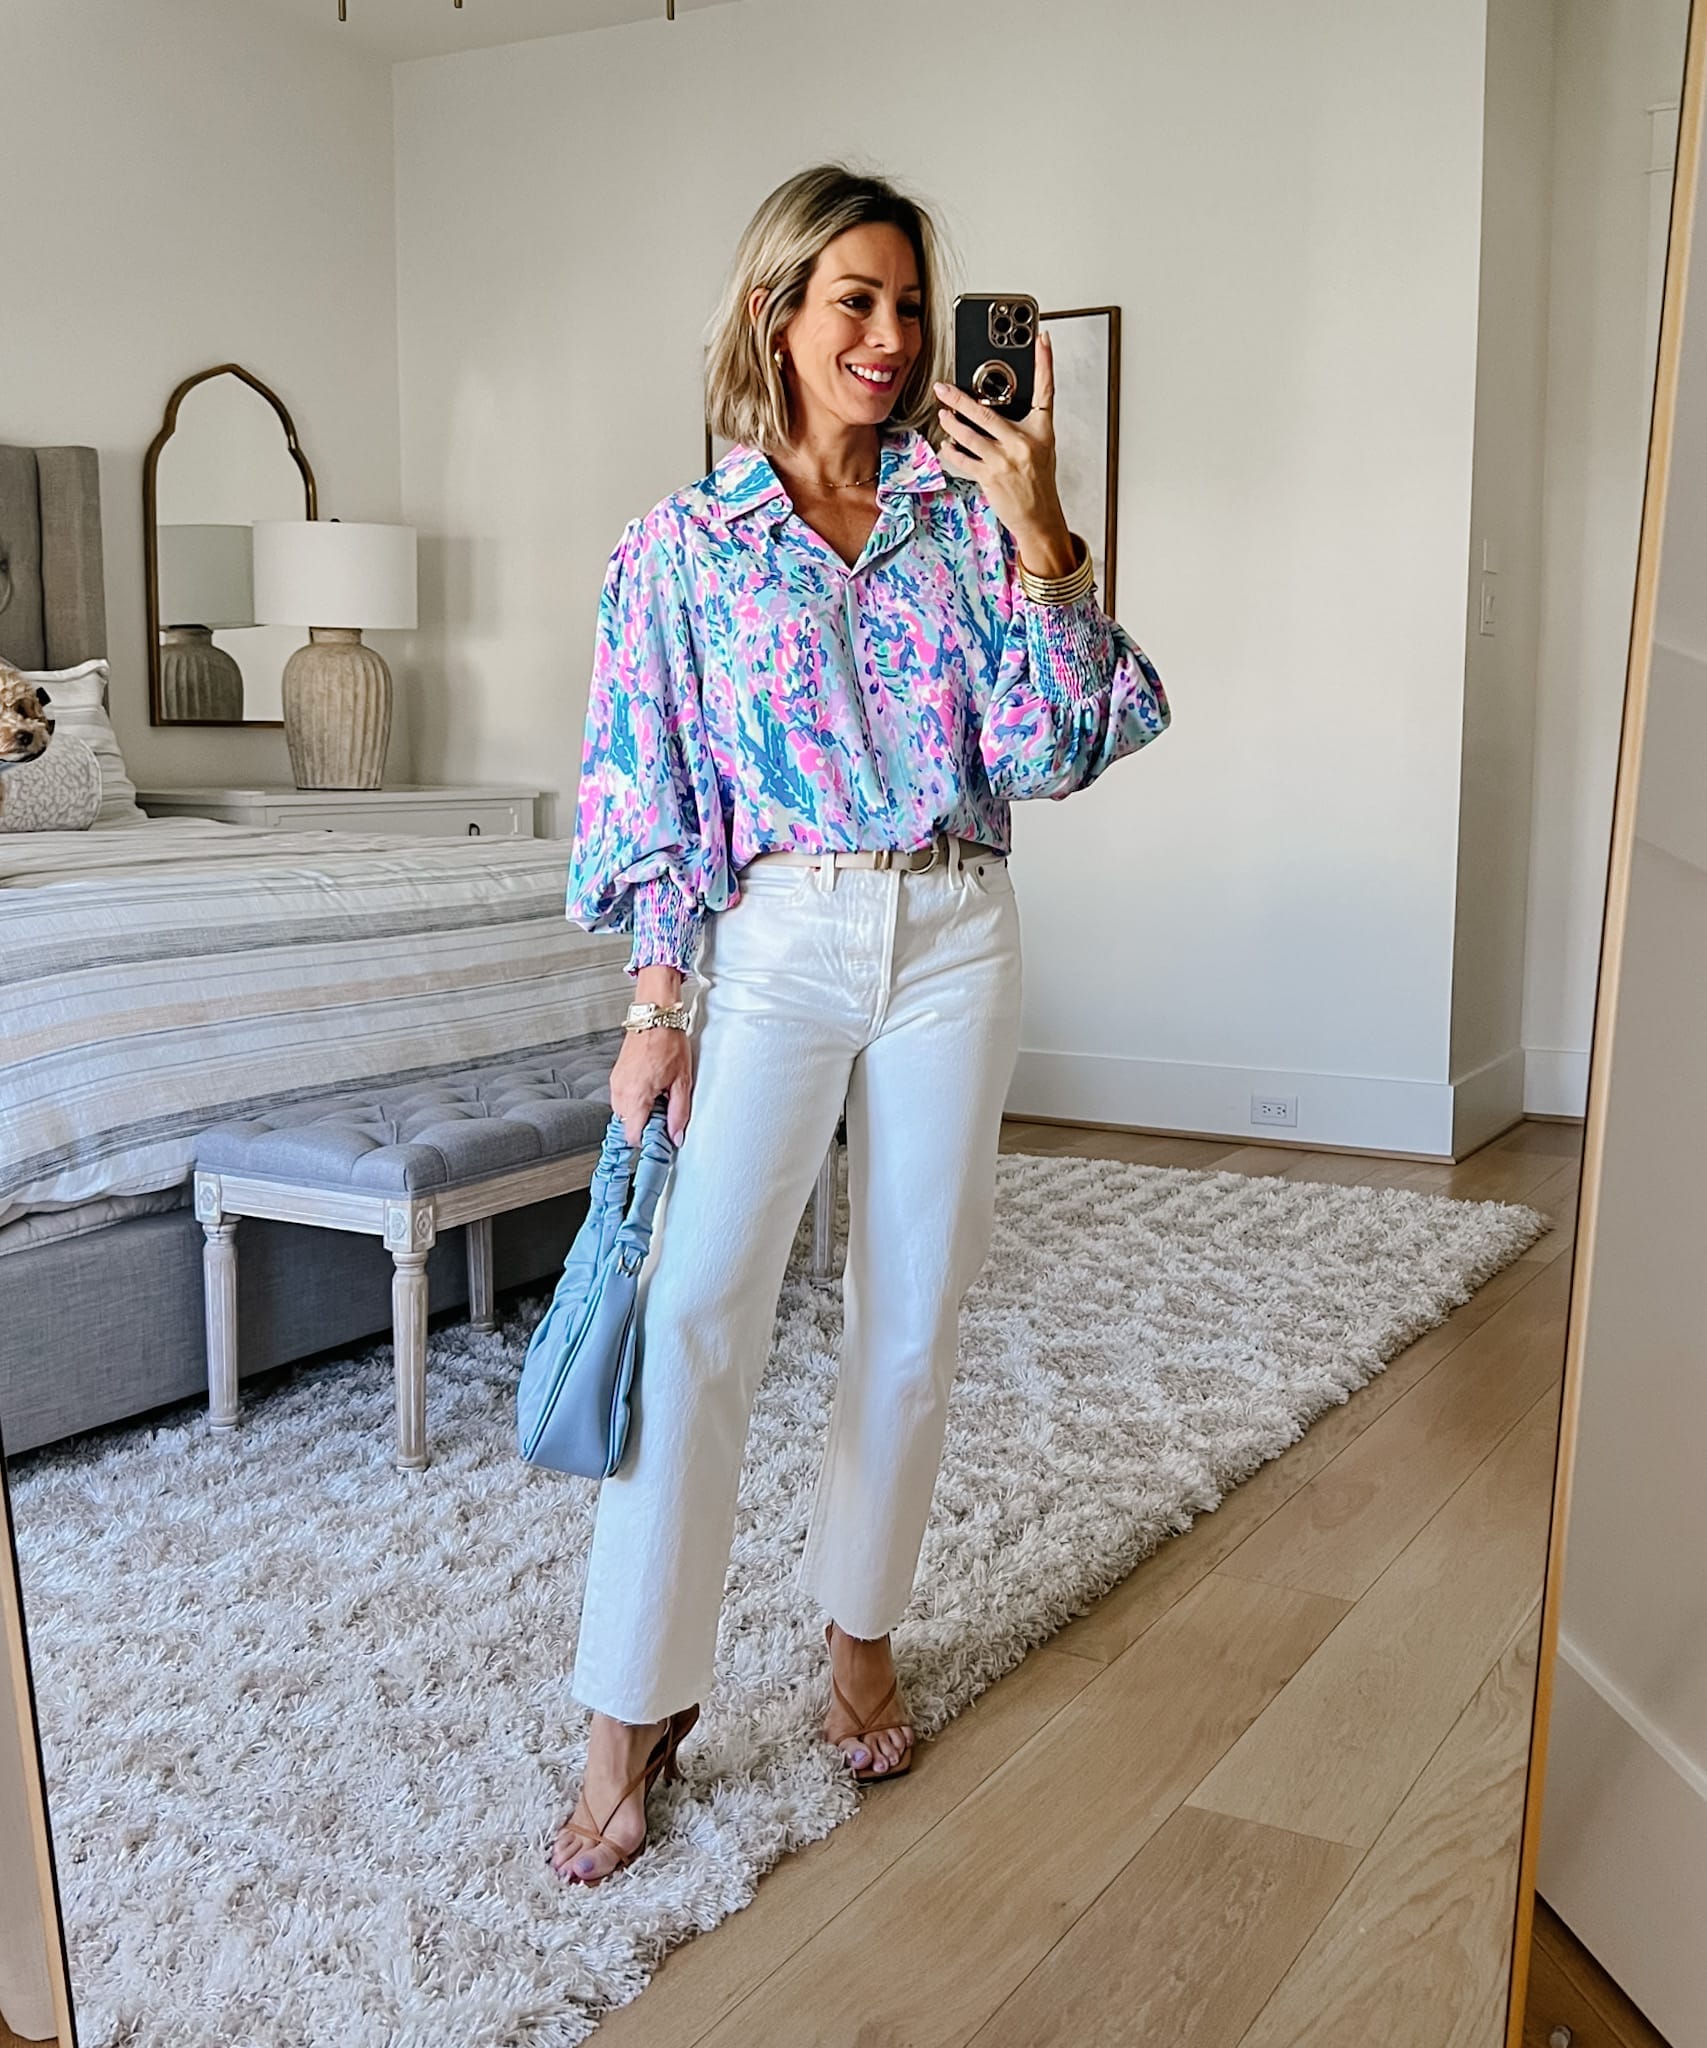 Lily Pulitzer Style Top, White Jeans, Sandals